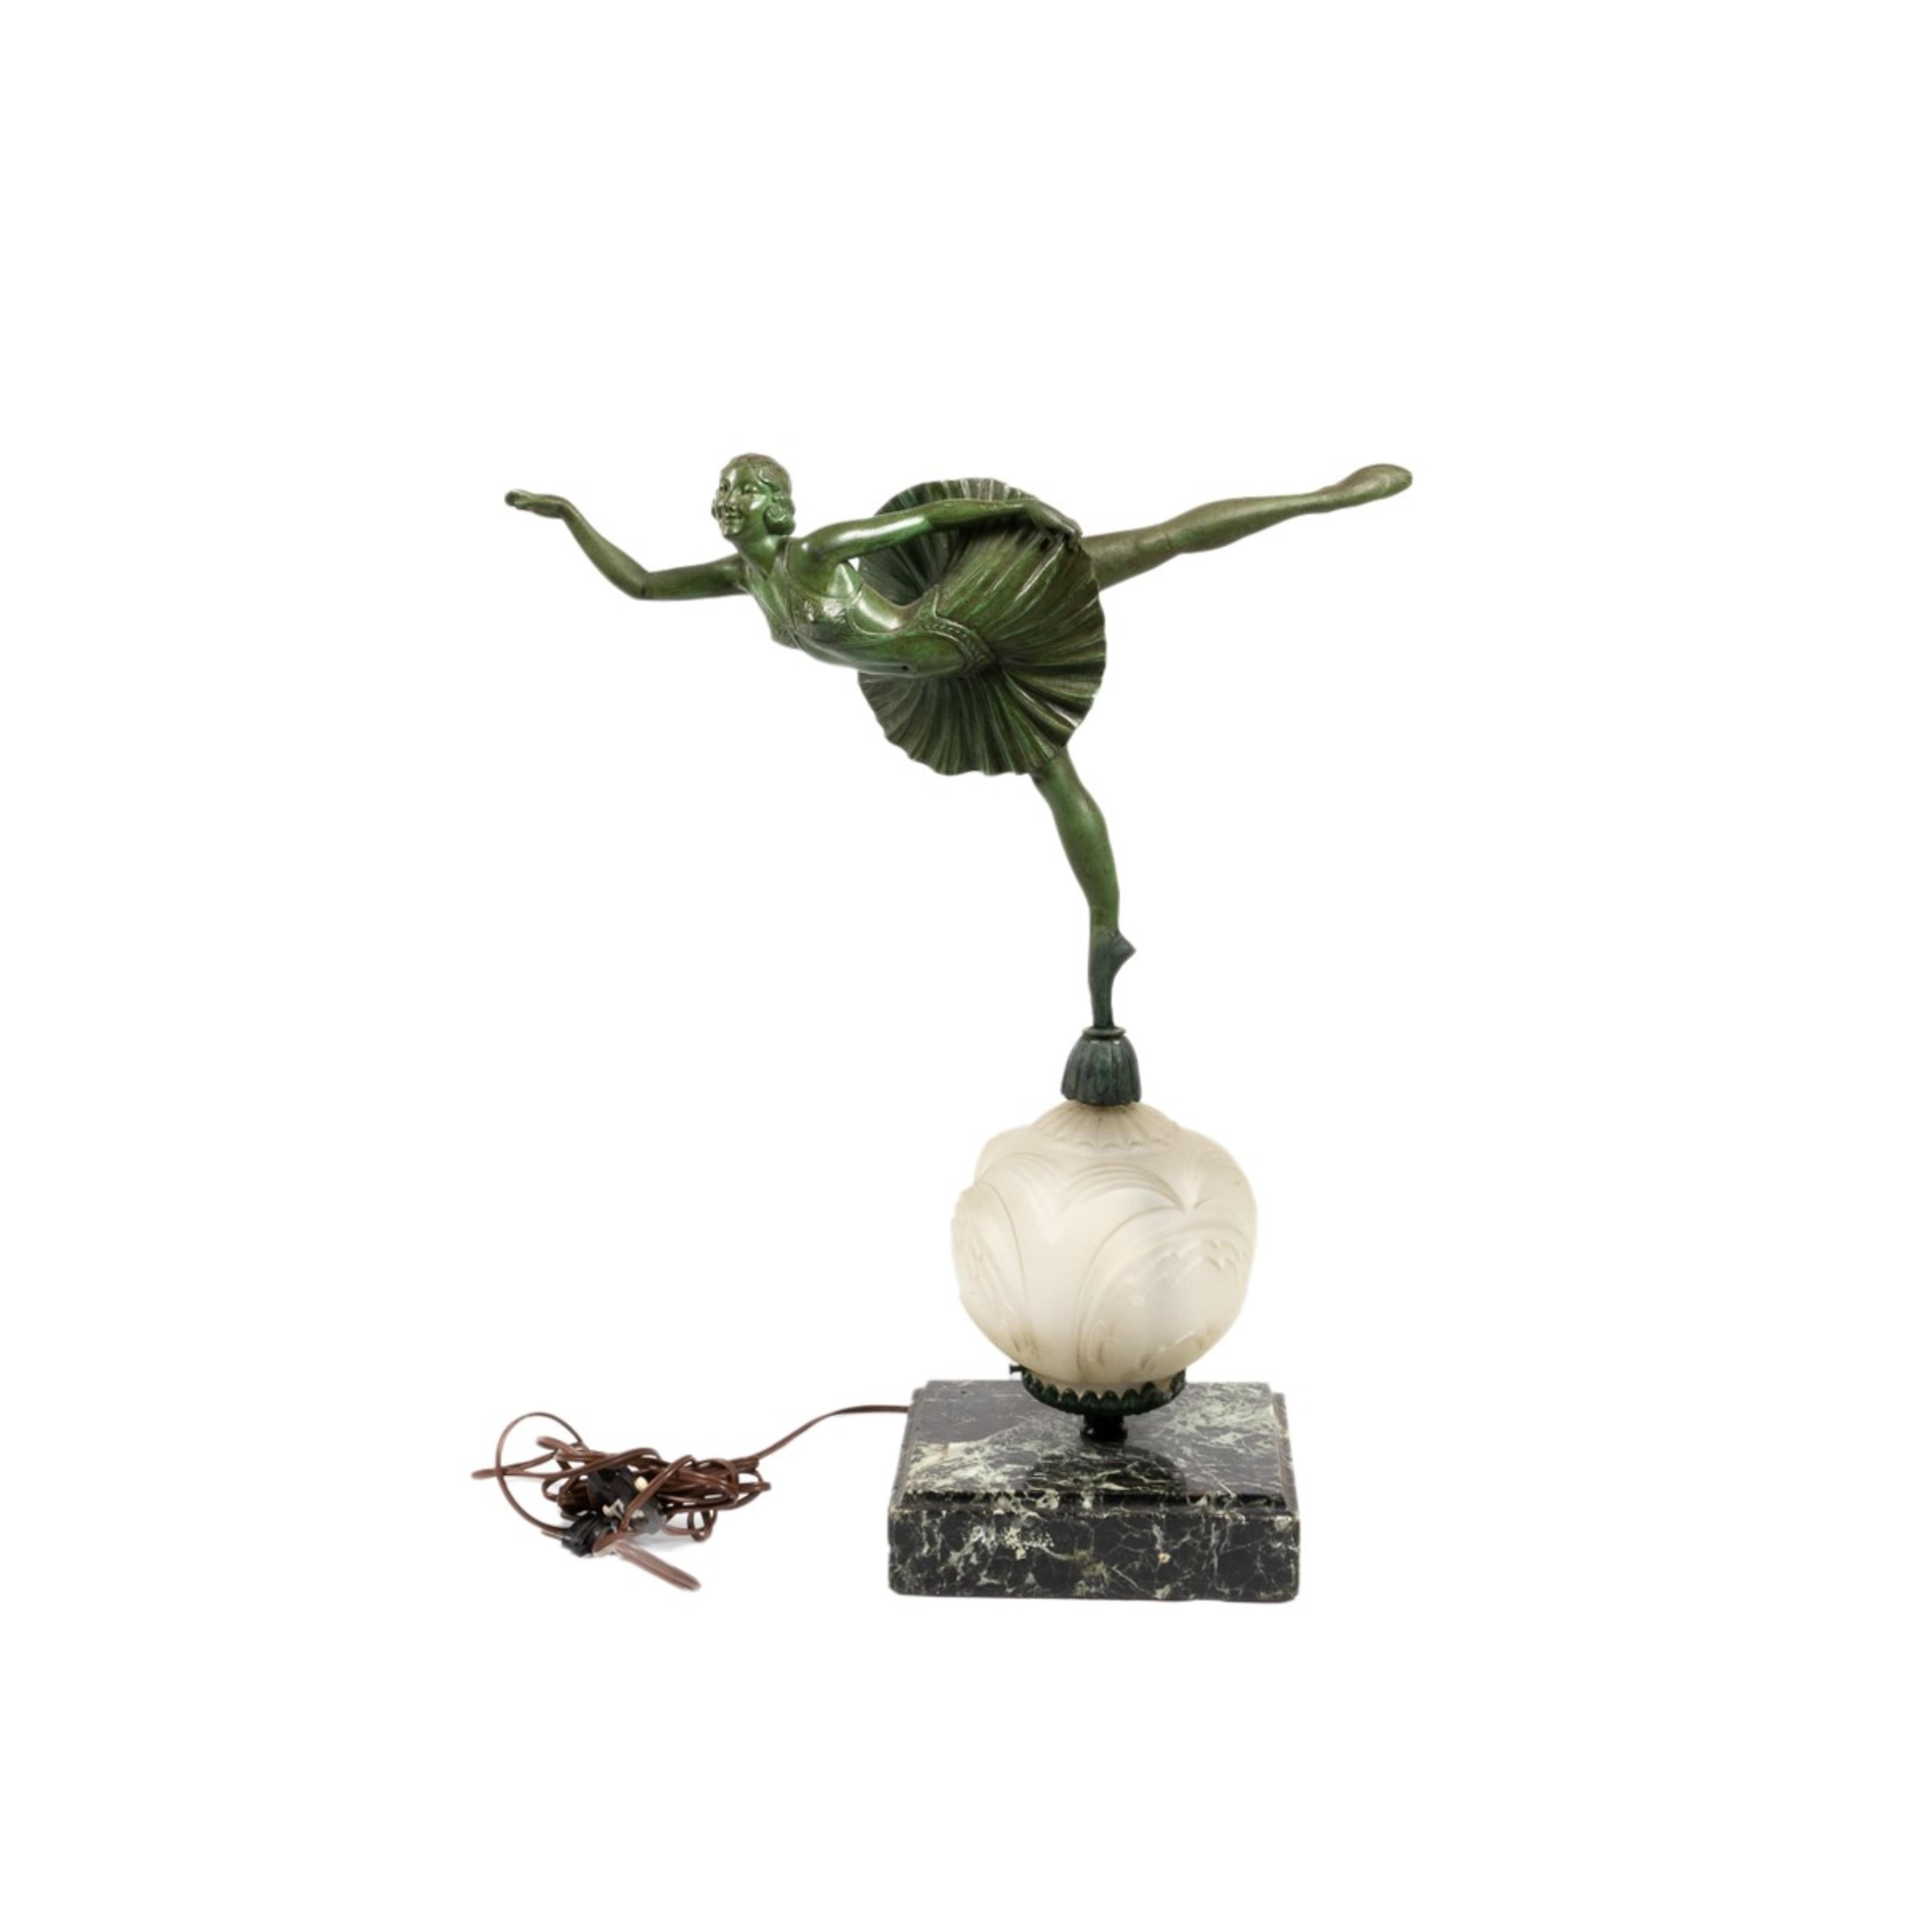 A patinated metal Art Deco figurine of a ballerina standing on one foot, a Dominique Alonzo model, in green patine with frosted glass and a green marble base.
